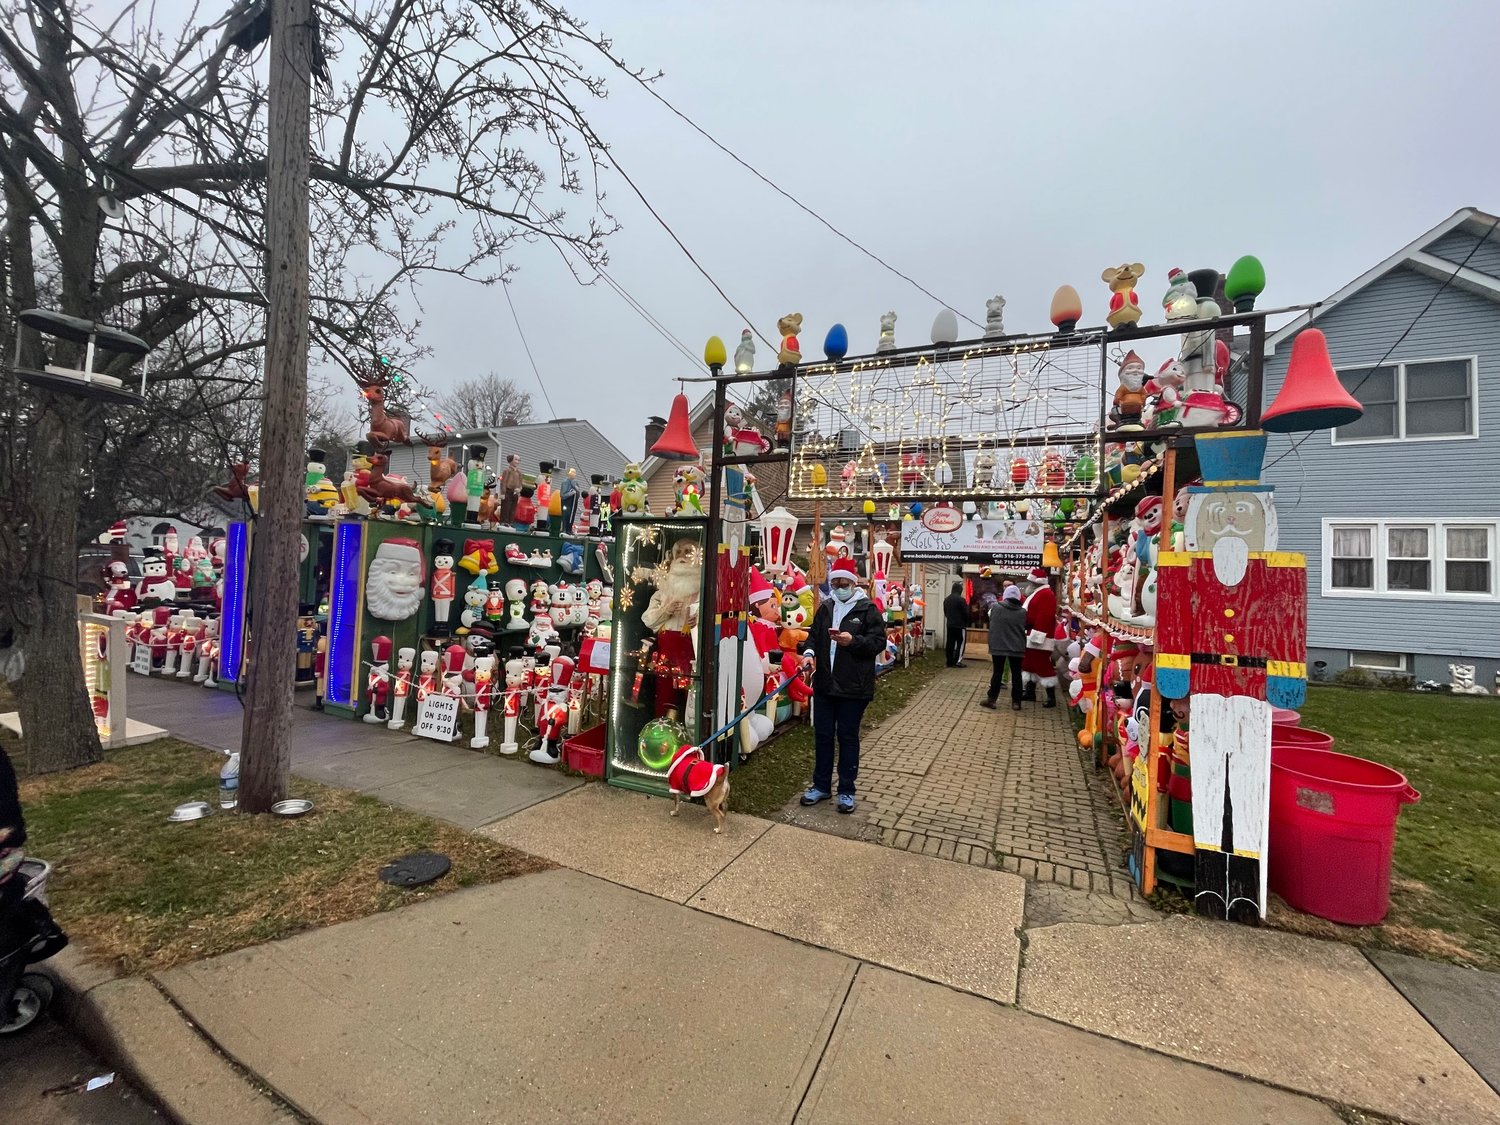 Every year, the Heide family in Merrick set up their lawn with a holiday display like no other. This year, they are collecting monetary and supply donations for Bobbi and The Strays Animal Rescue.